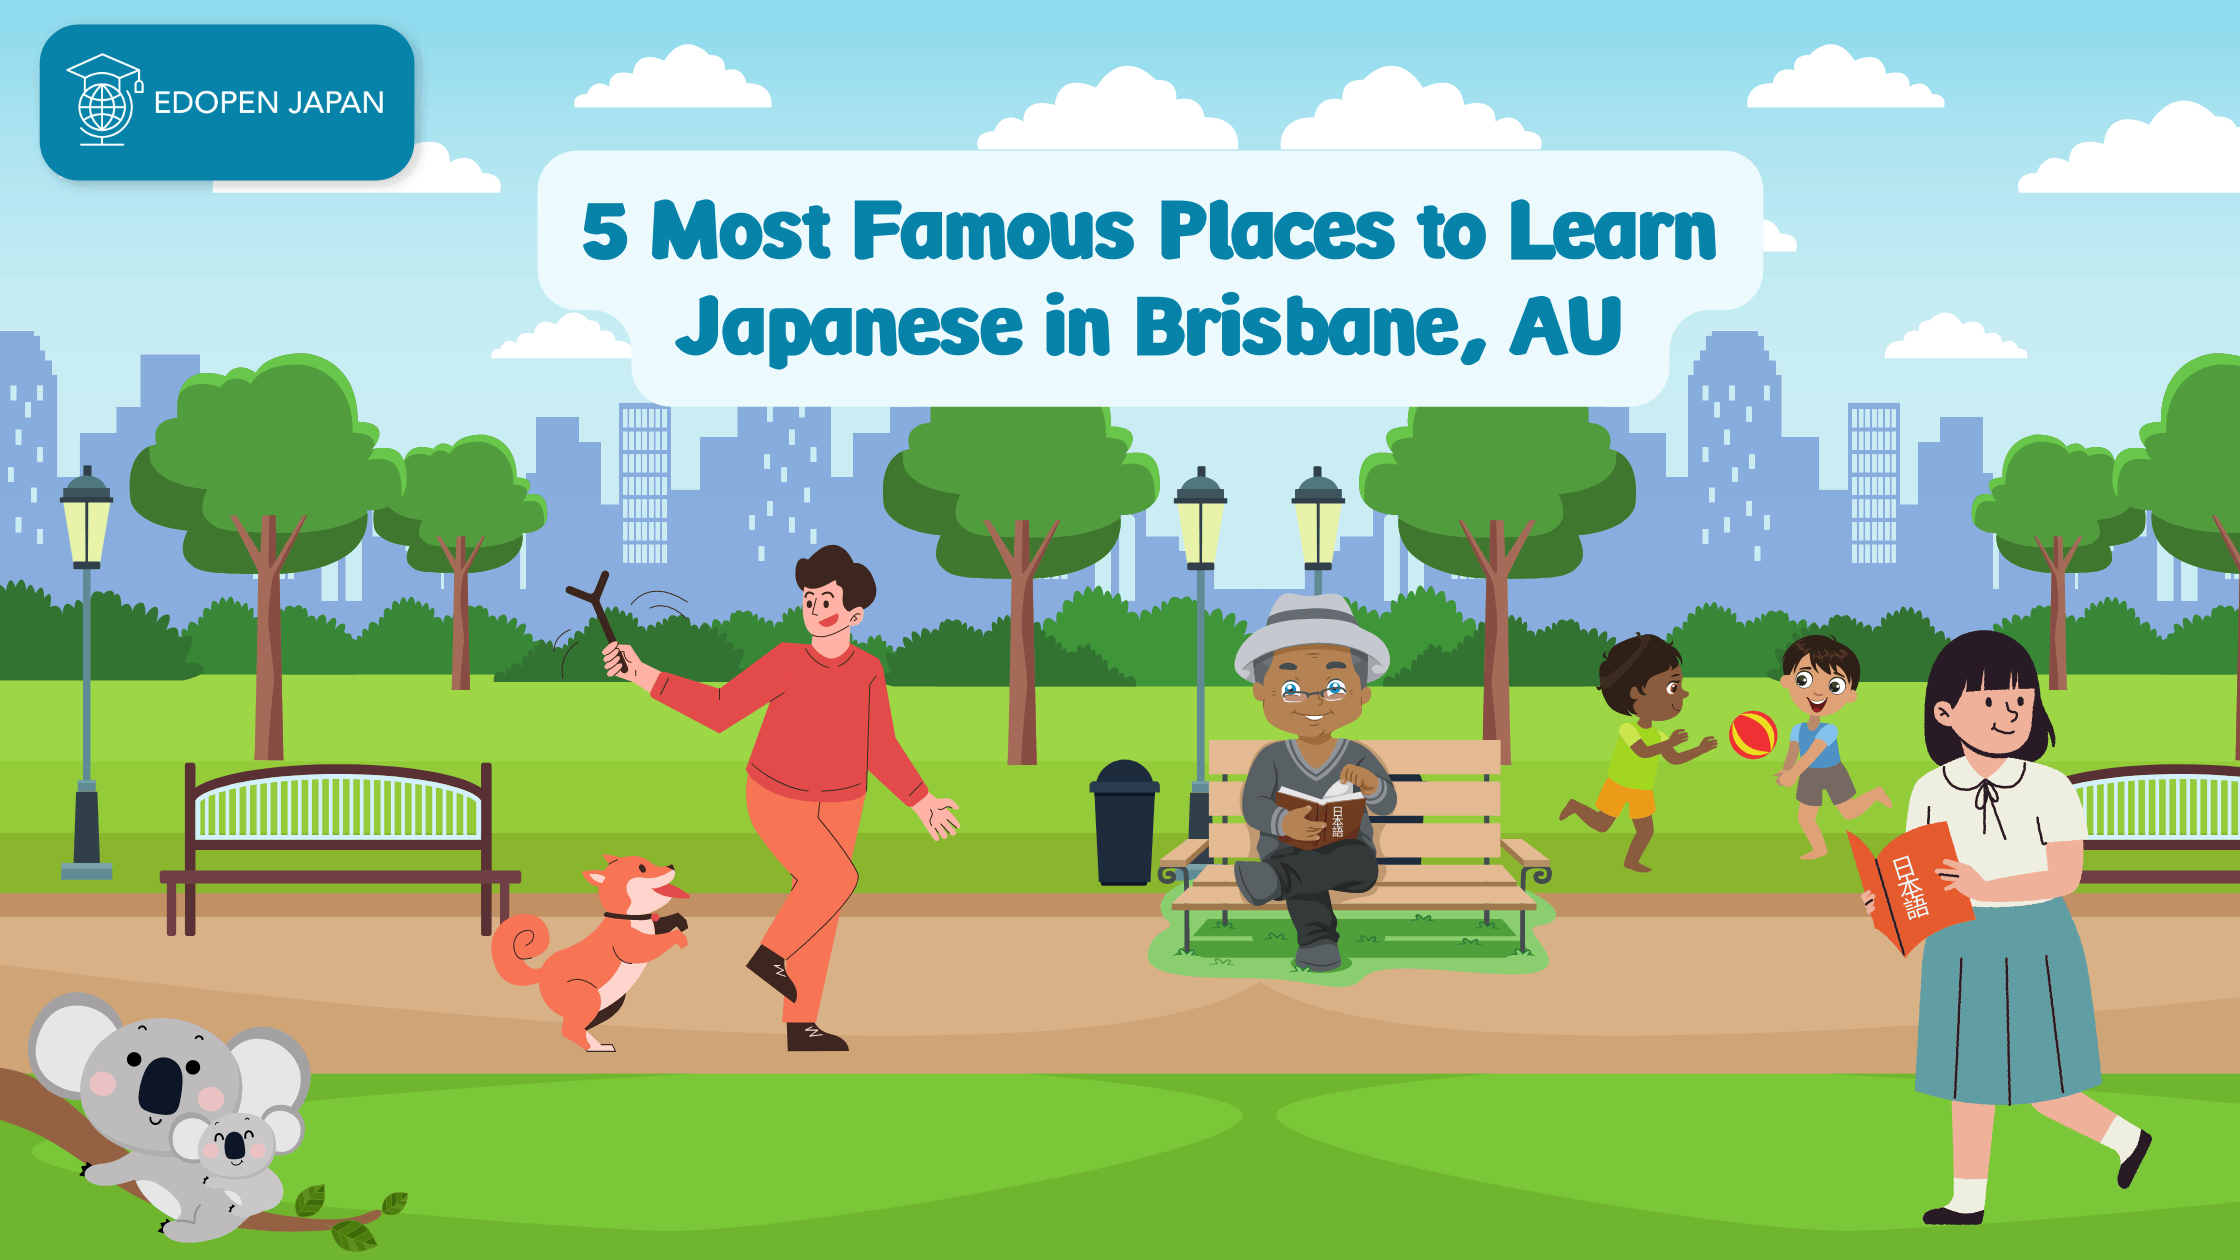 5 Most Famous Places to Learn Japanese in Brisbane, AU